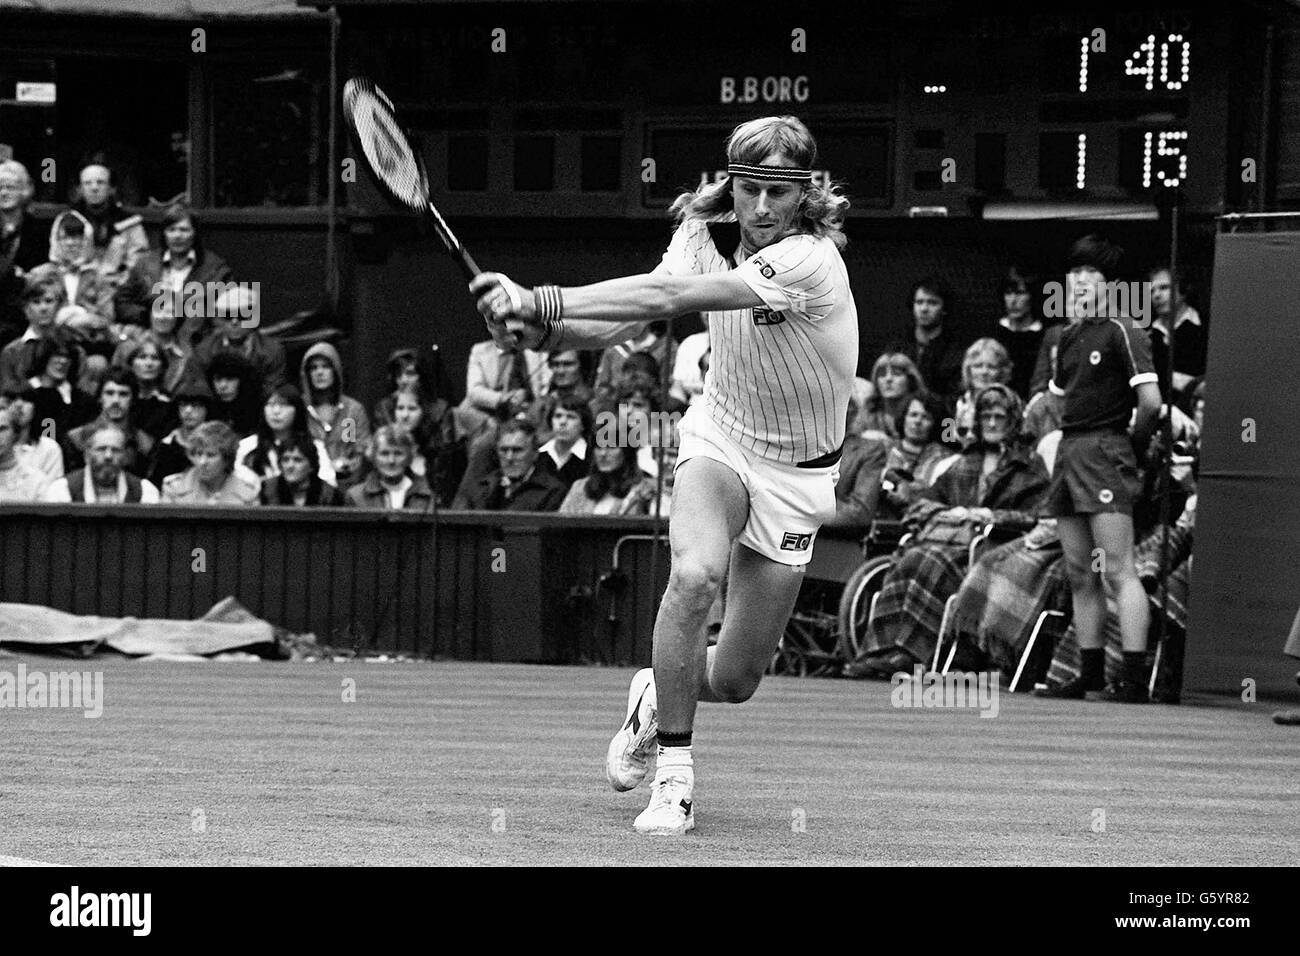 Bjorn Borg of Sweden in action on the centre court in the opening game of the 1980 Wimbledon tournament, defending his fourth successive title. His opponent is the Egyptian player Ismael El Shafei, one of three men ever to have beaten Borg at Wimbledon. Stock Photo